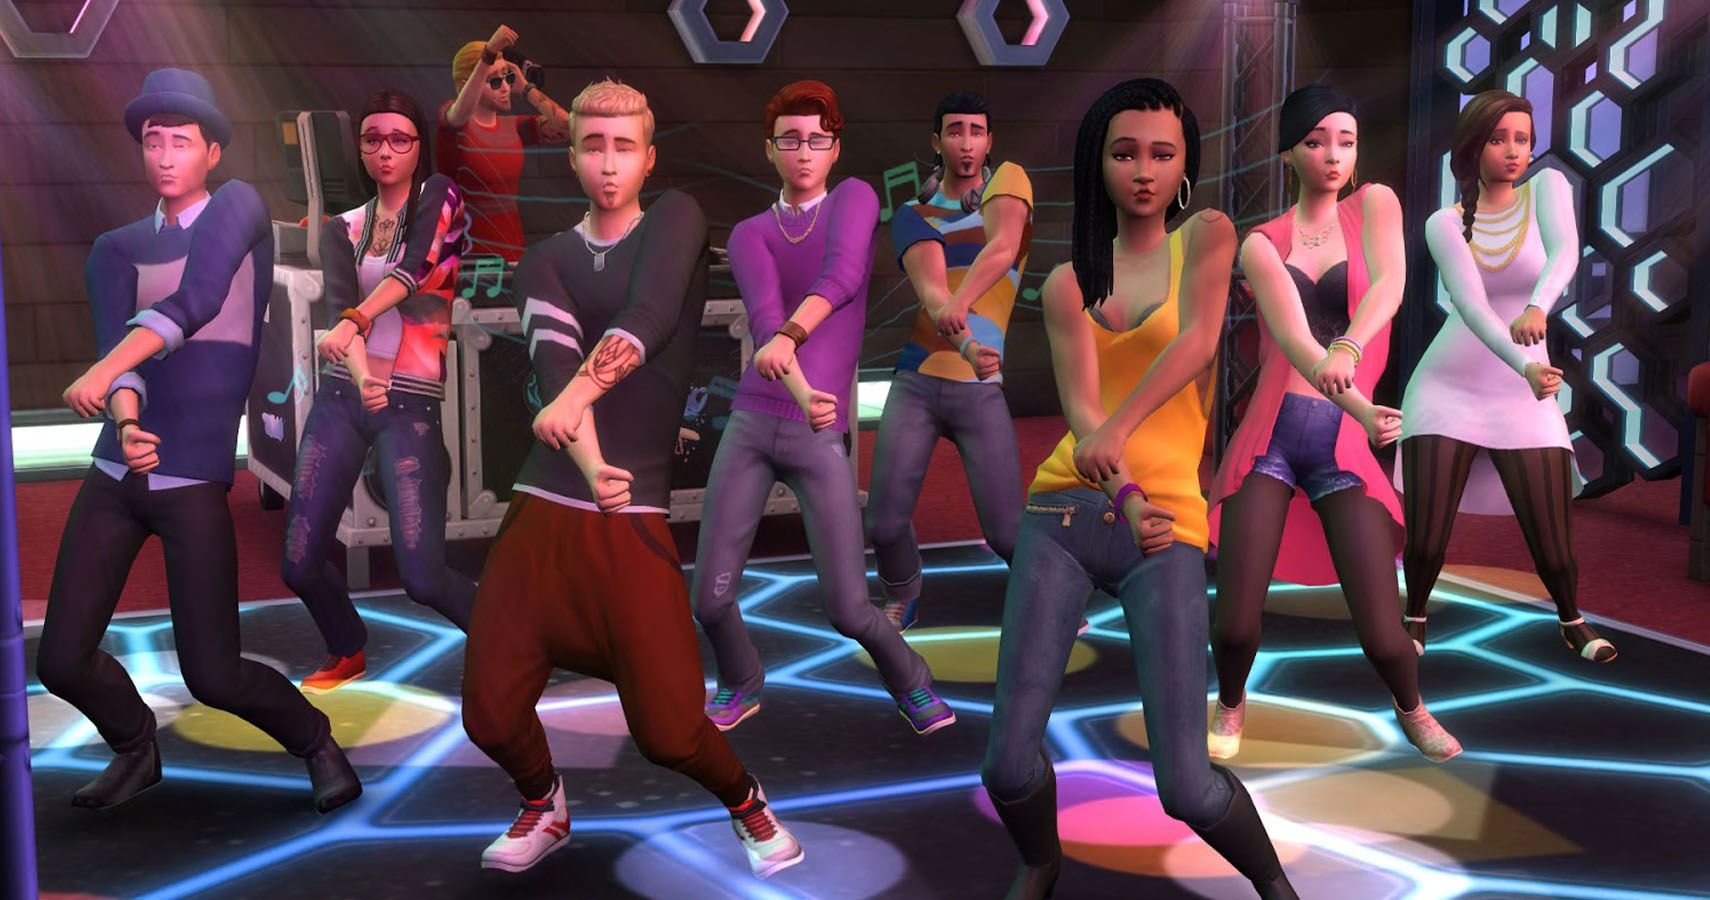 Lists Of The Best Sims 4 Expansion Packs Are Pointless